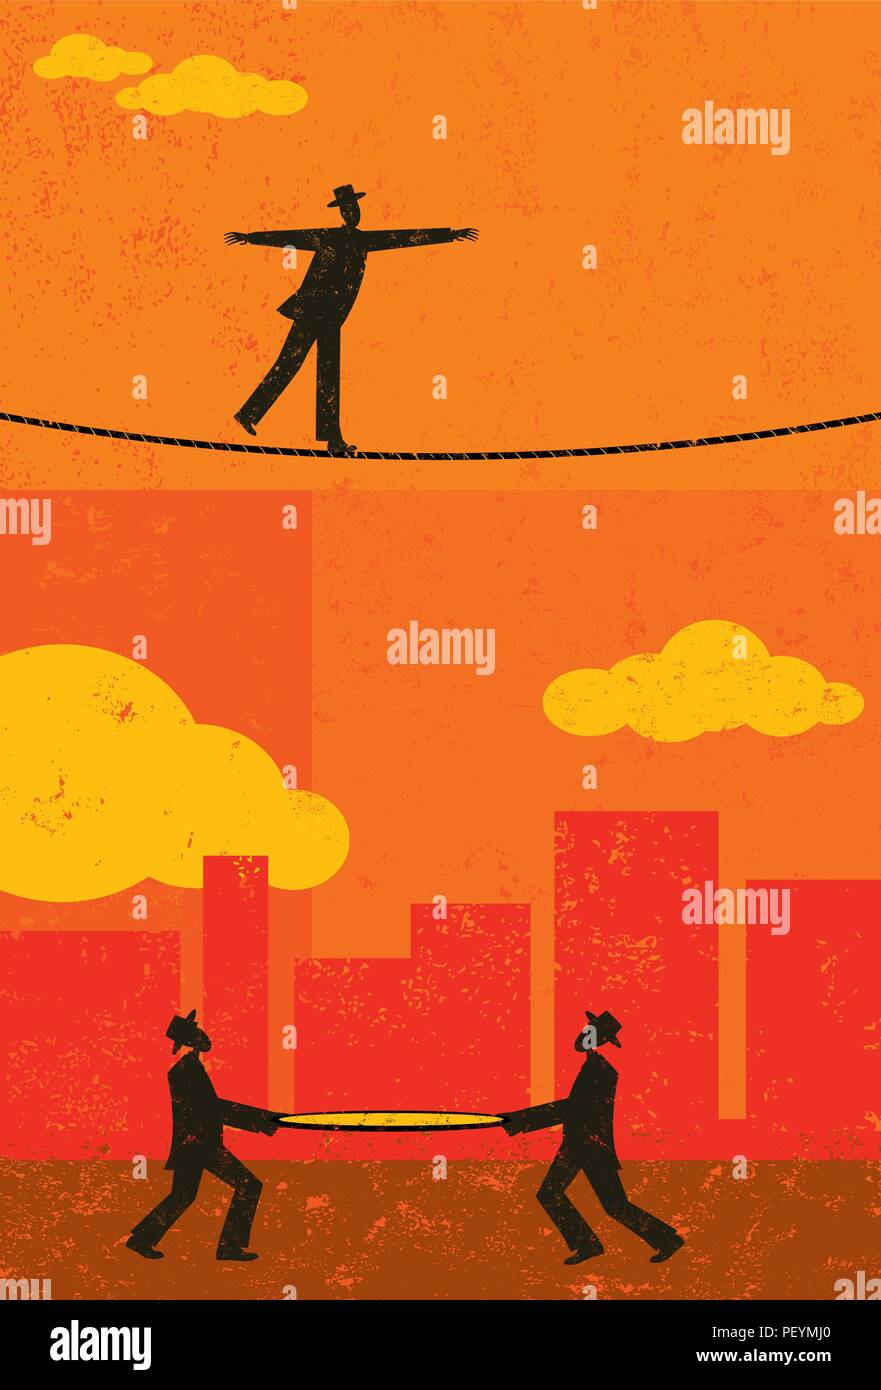 Walking a Tightrope. A retro businessman walking a tightrope with two men and a safety net underneath in case he falls. Stock Vector